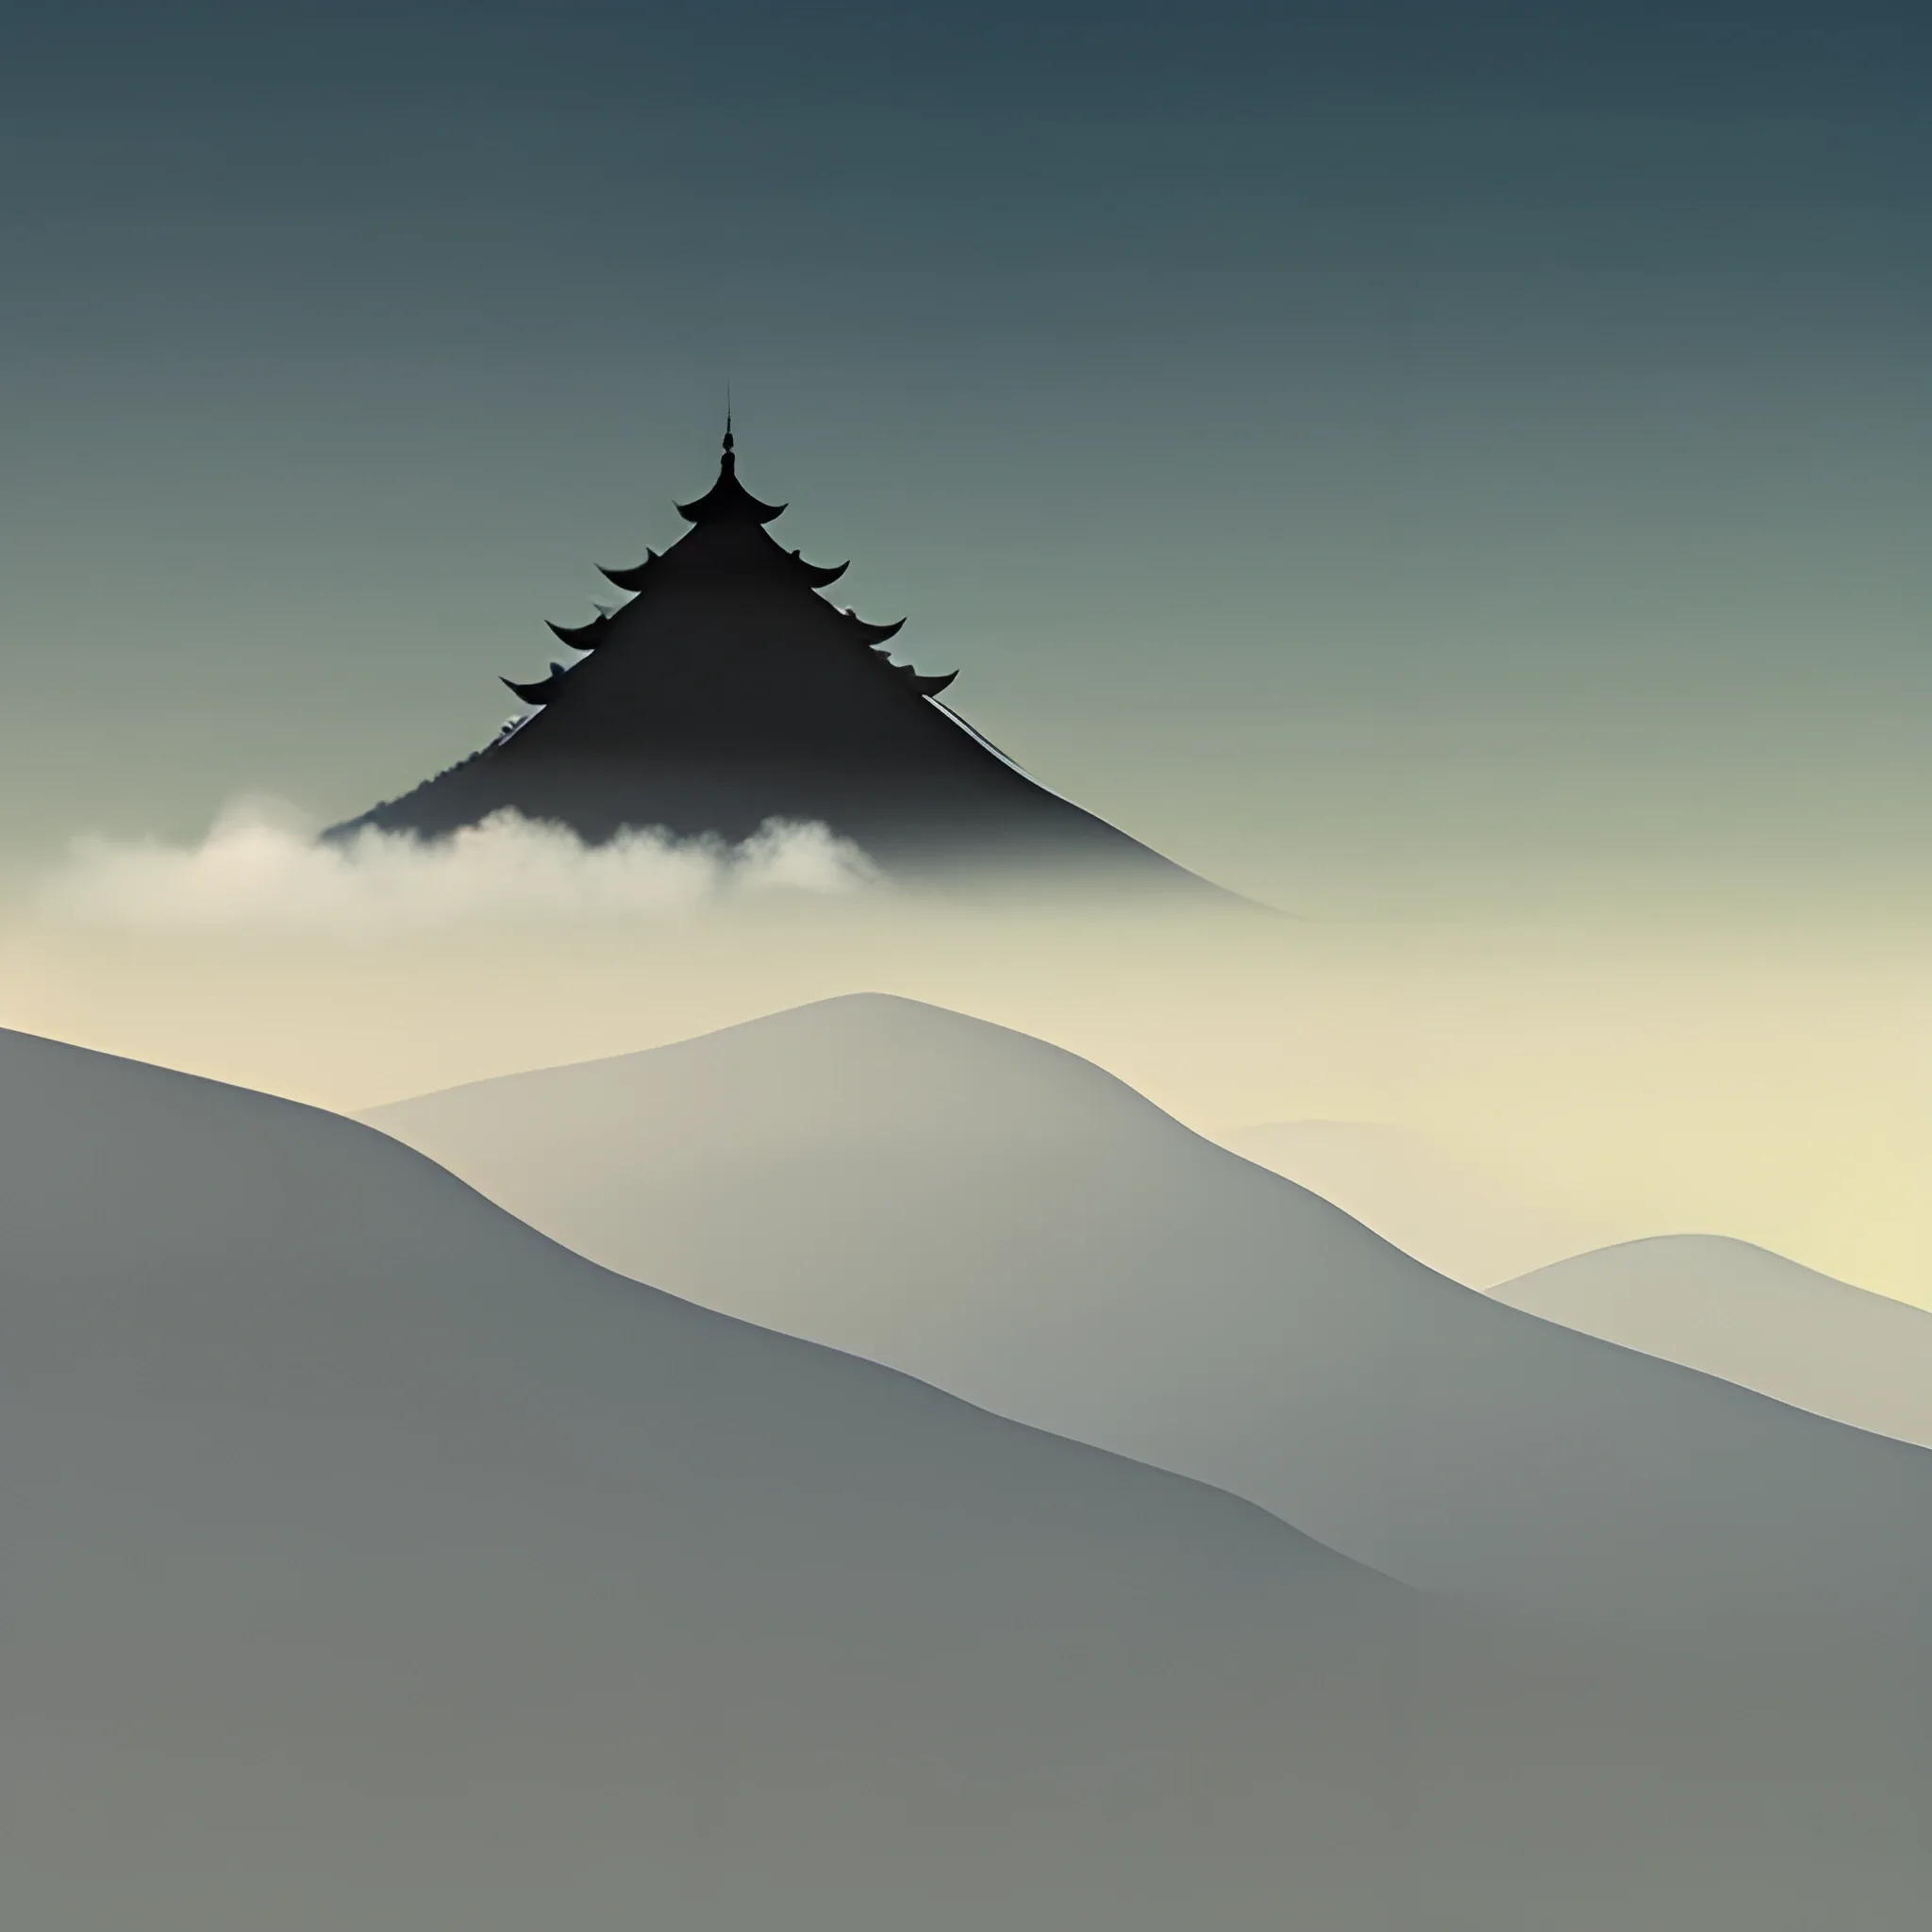 Chinese mountain more rounded silhouette with fog, Chinese brush painting style, tiny temple on top the mountain 